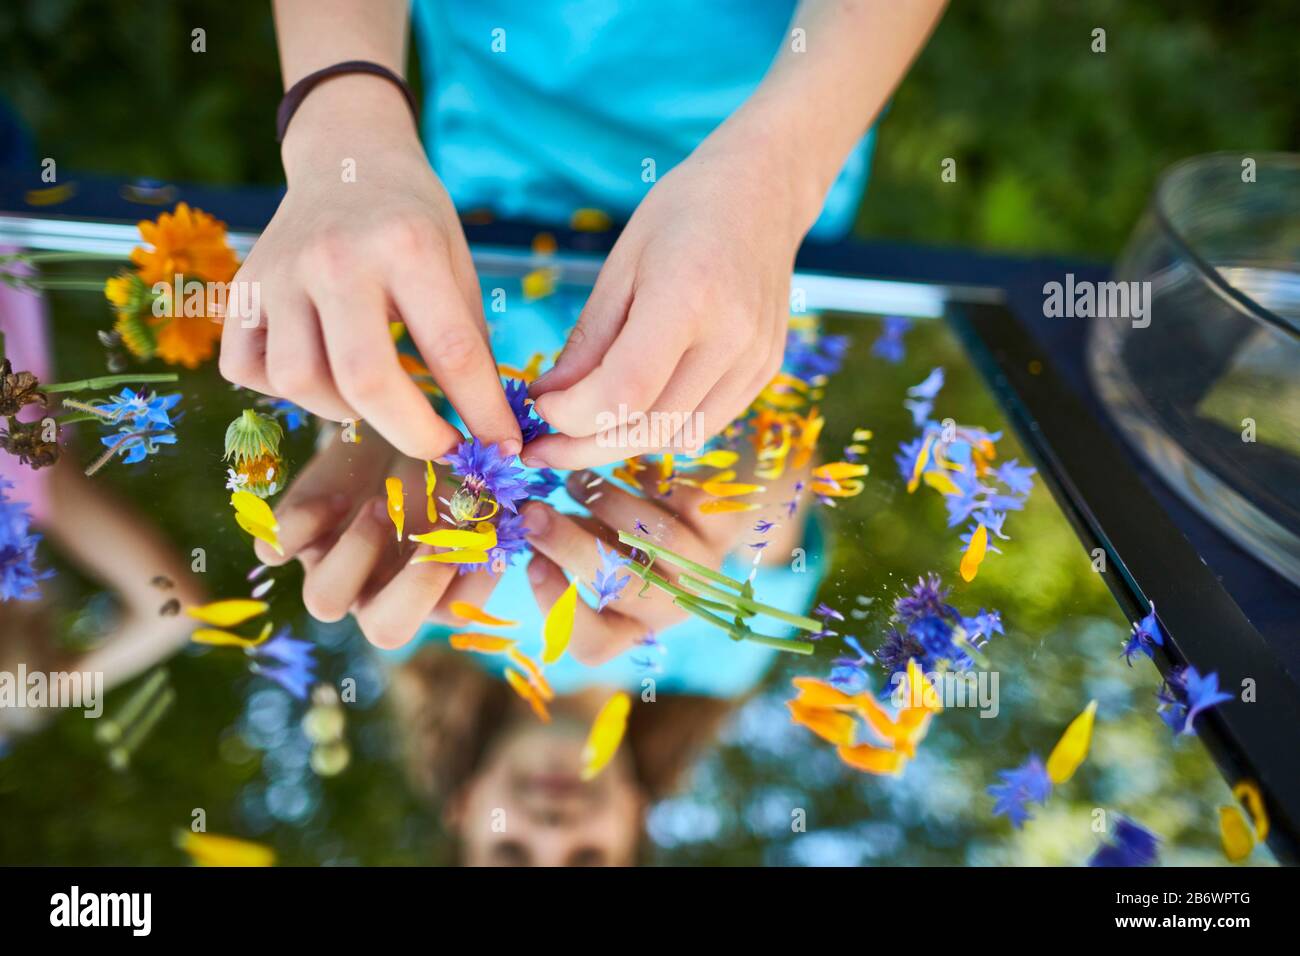 Children investigating food. Series: Preparation of flower sugar. Drying suitable flowers. Learning according to the Reggio Pedagogy principle, playful understanding and discovery. Germany. Stock Photo